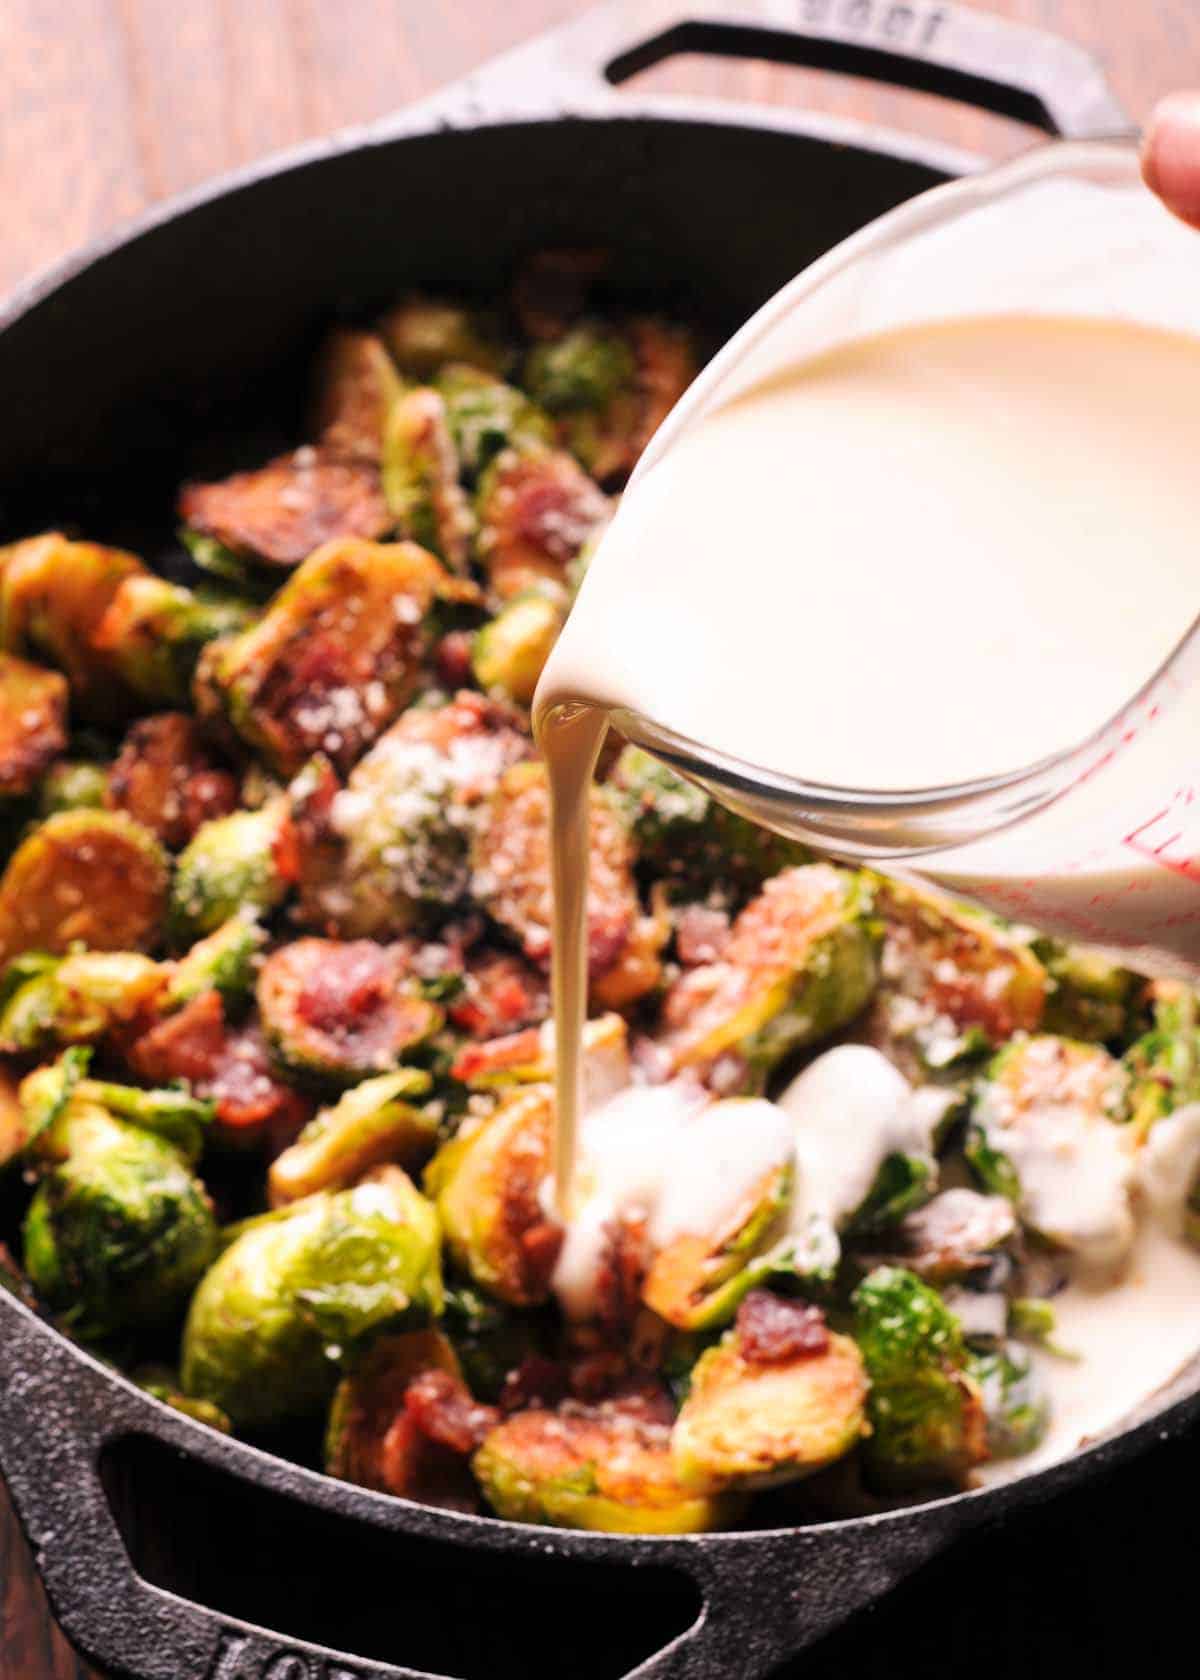 Heavy Cream added to the Brussels sprouts